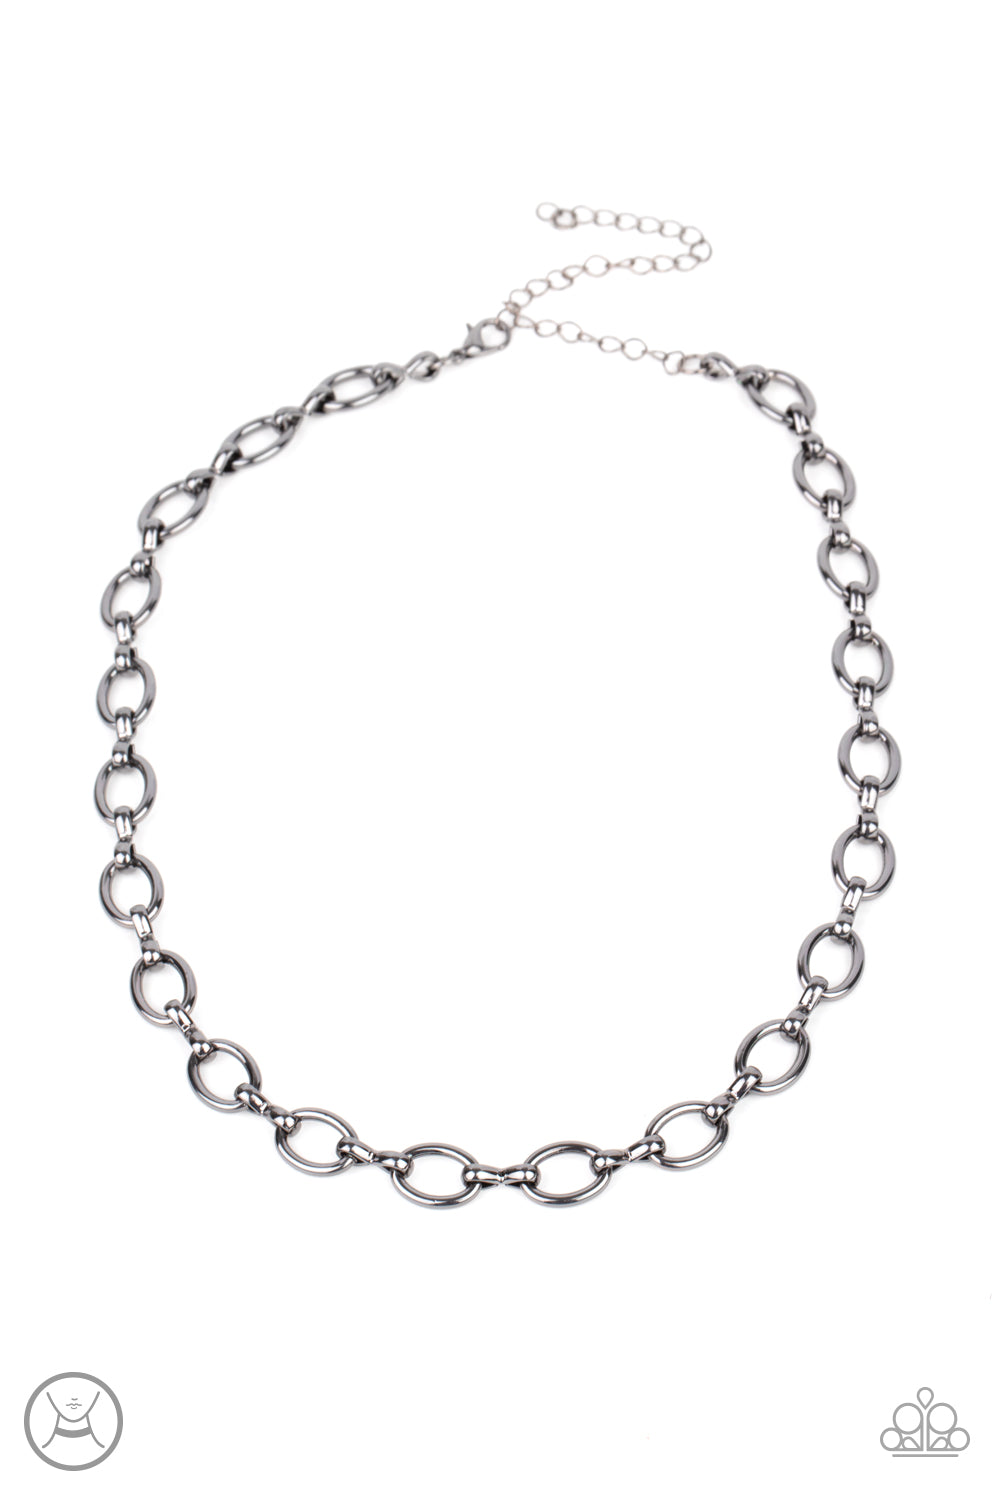 A collection of oversized gunmetal ovals and glistening gunmetal fittings interlock around the neck, creating an intense industrial look